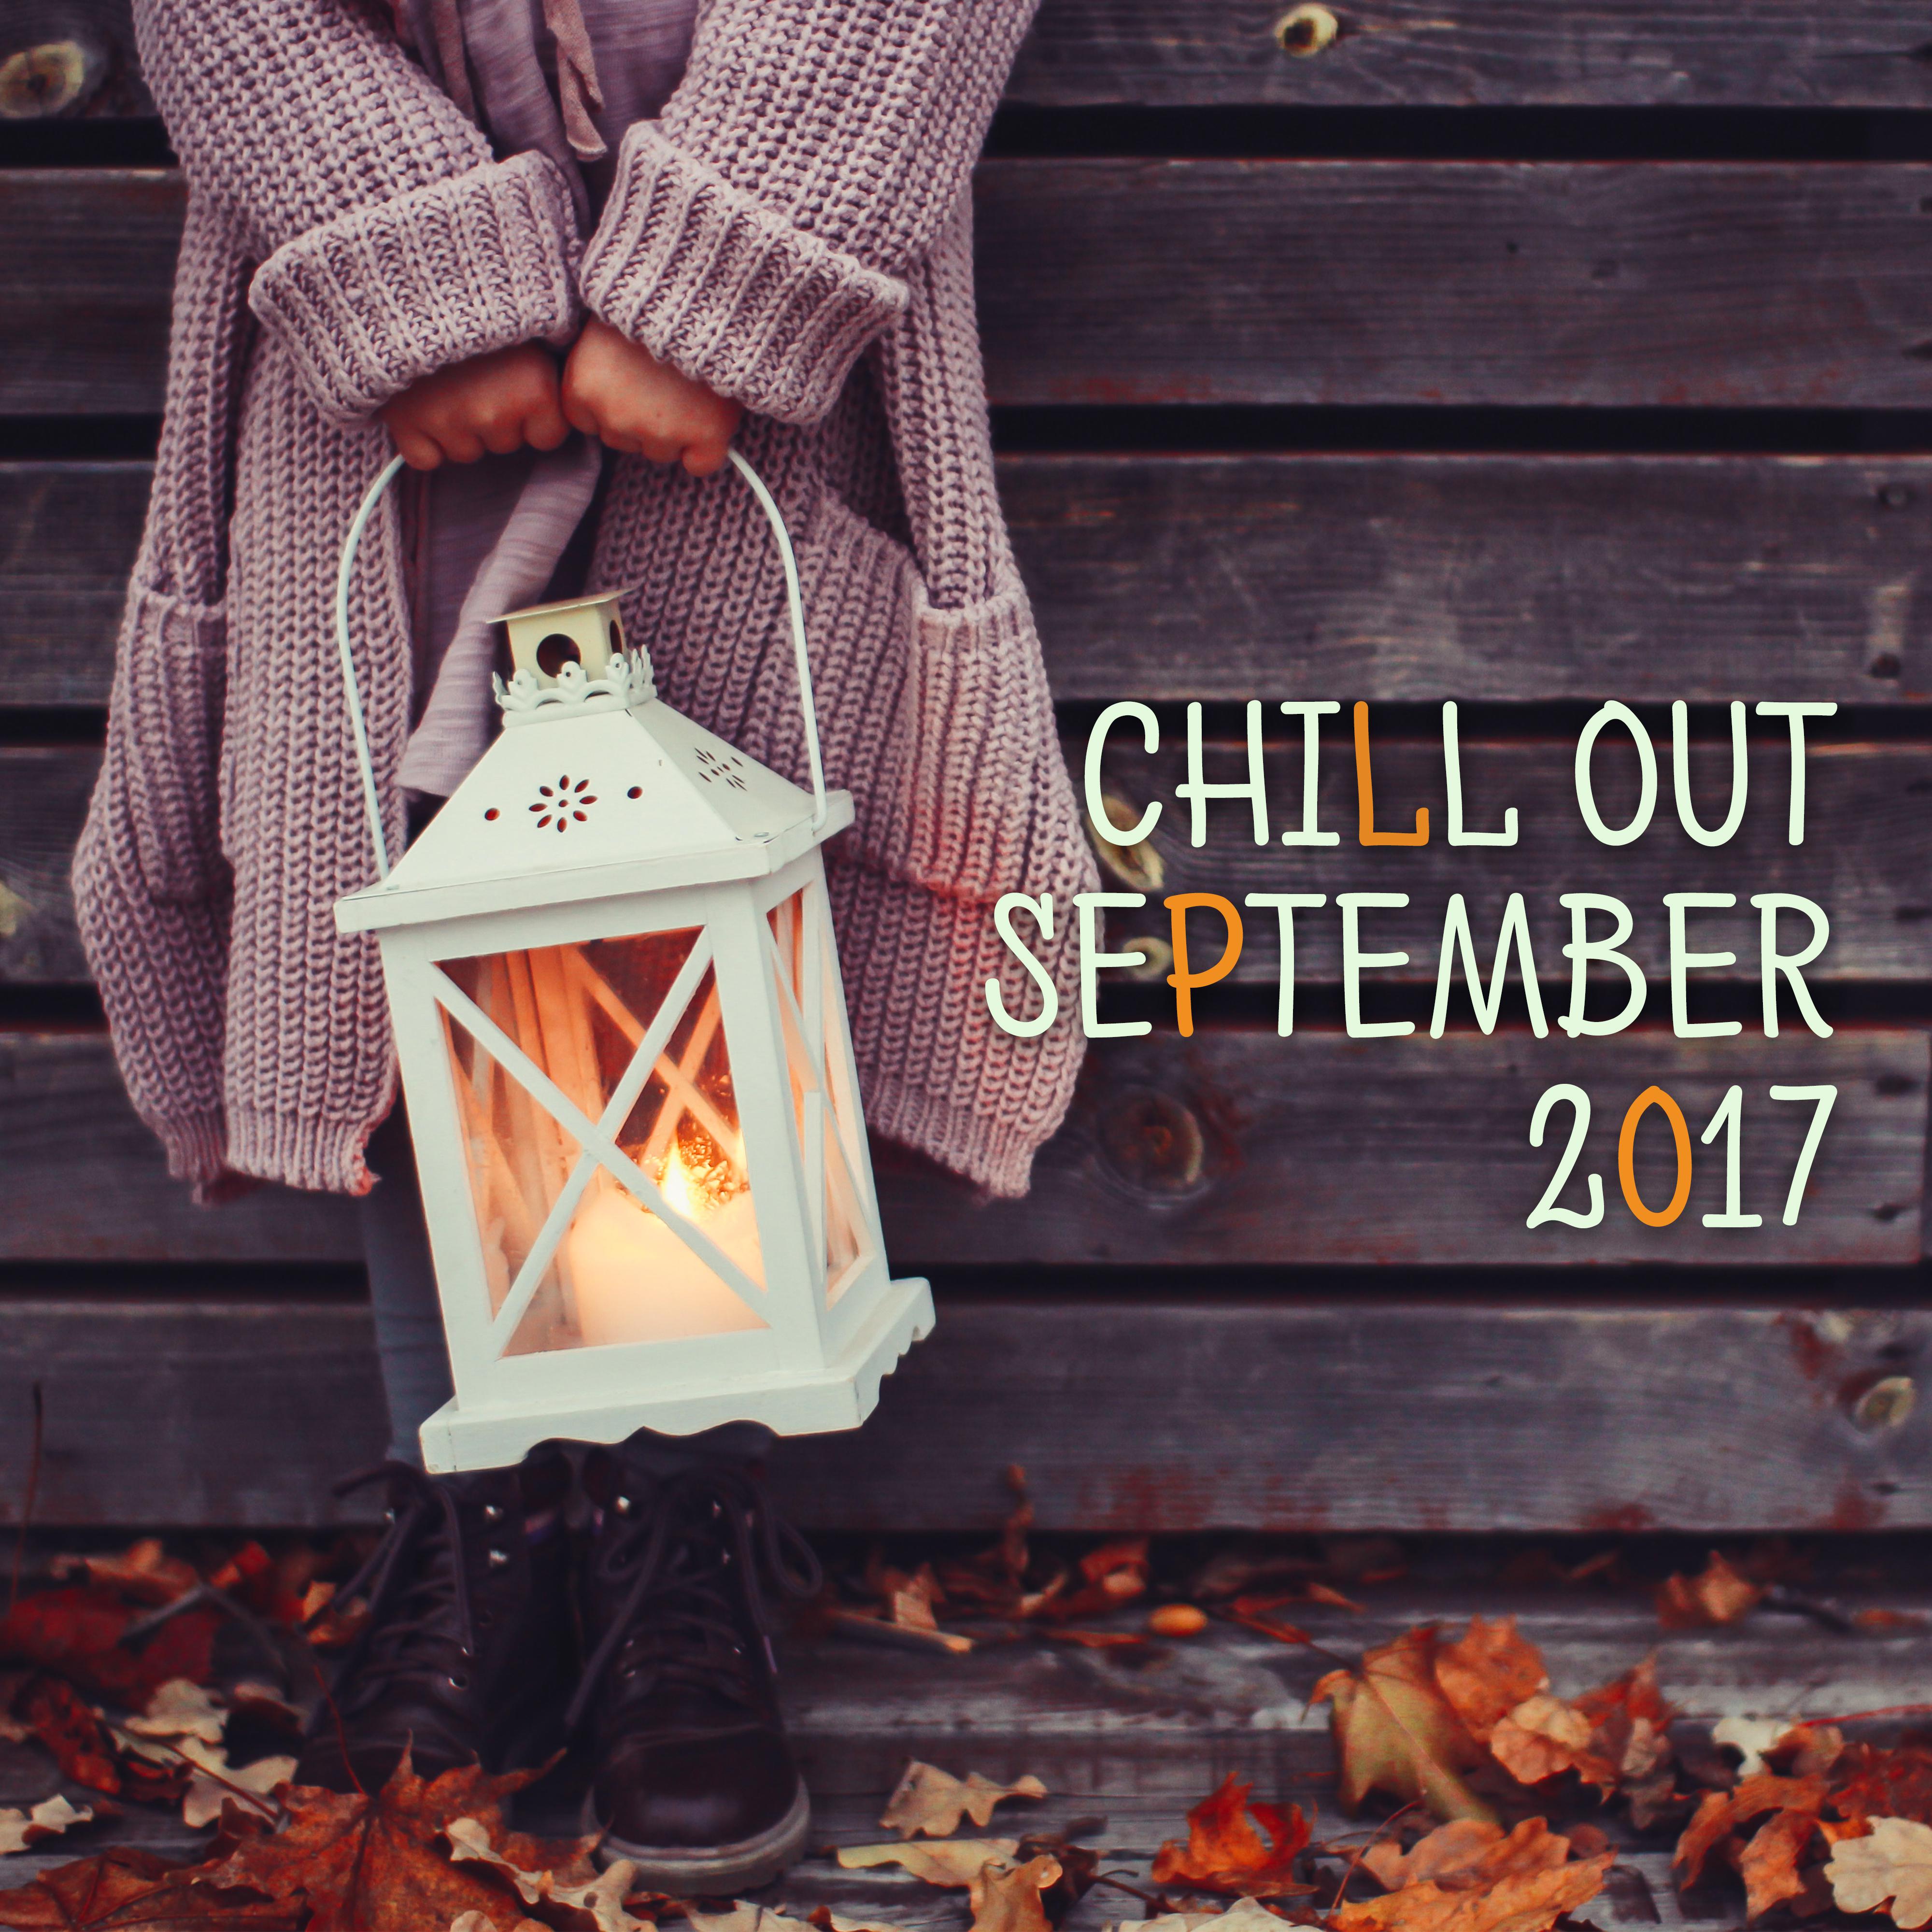 Chill Out September 2017  Relax  Chill, Fresh Chill Out Music, Electronic Vibes, September Hits 2017